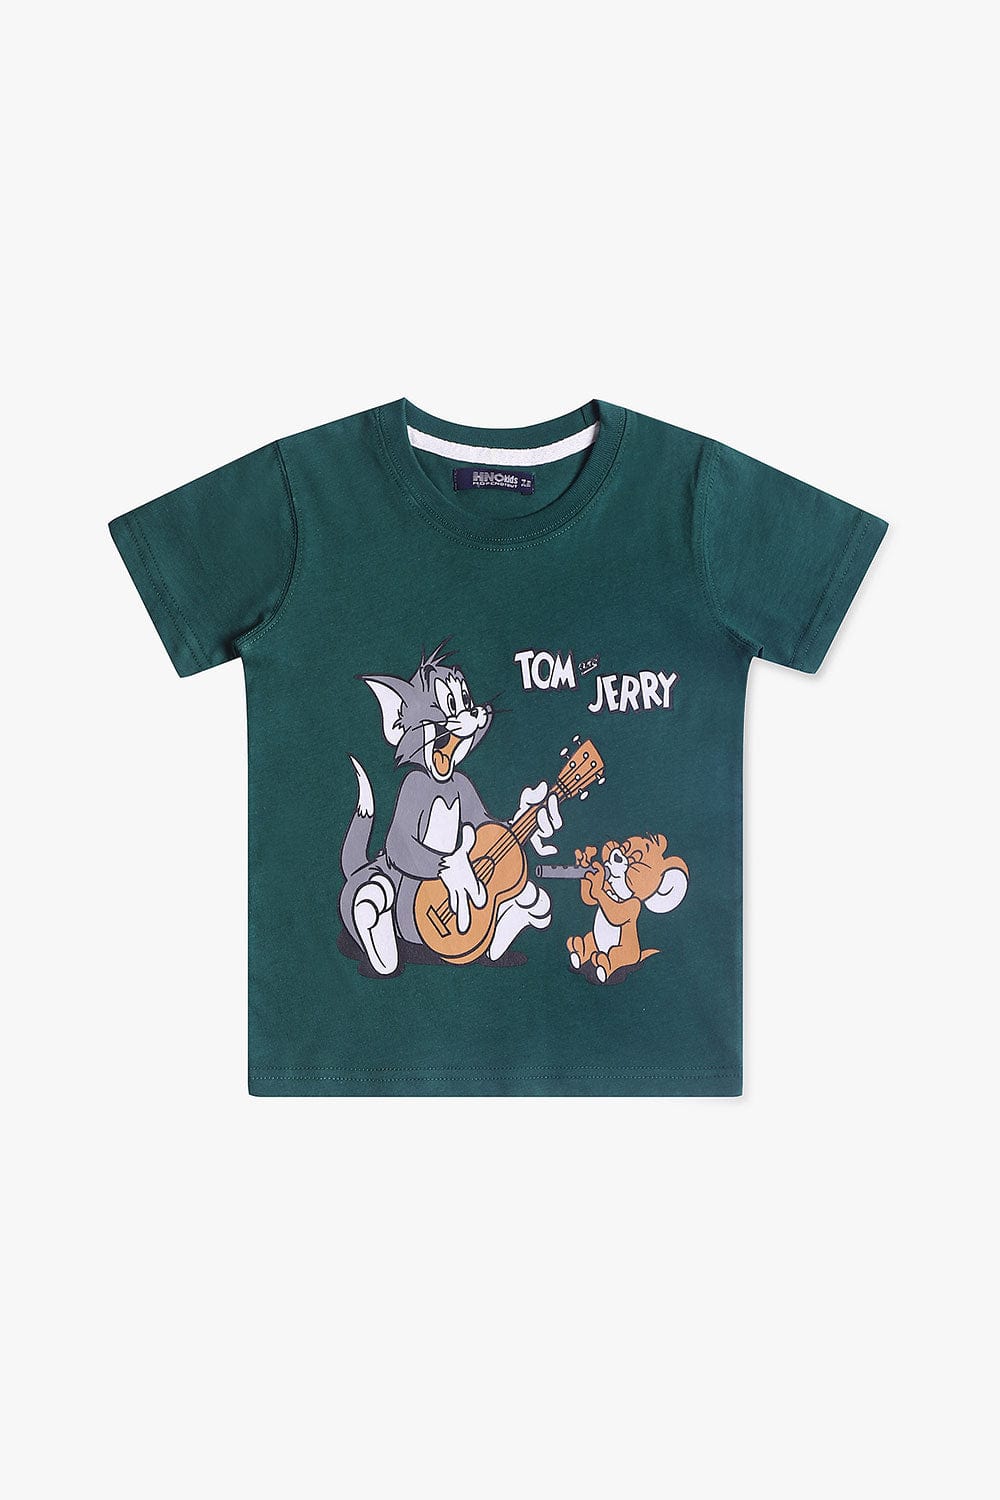 Hope Not Out by Shahid Afridi Boys Knit T-Shirt Tom and Jerry T-Shirt